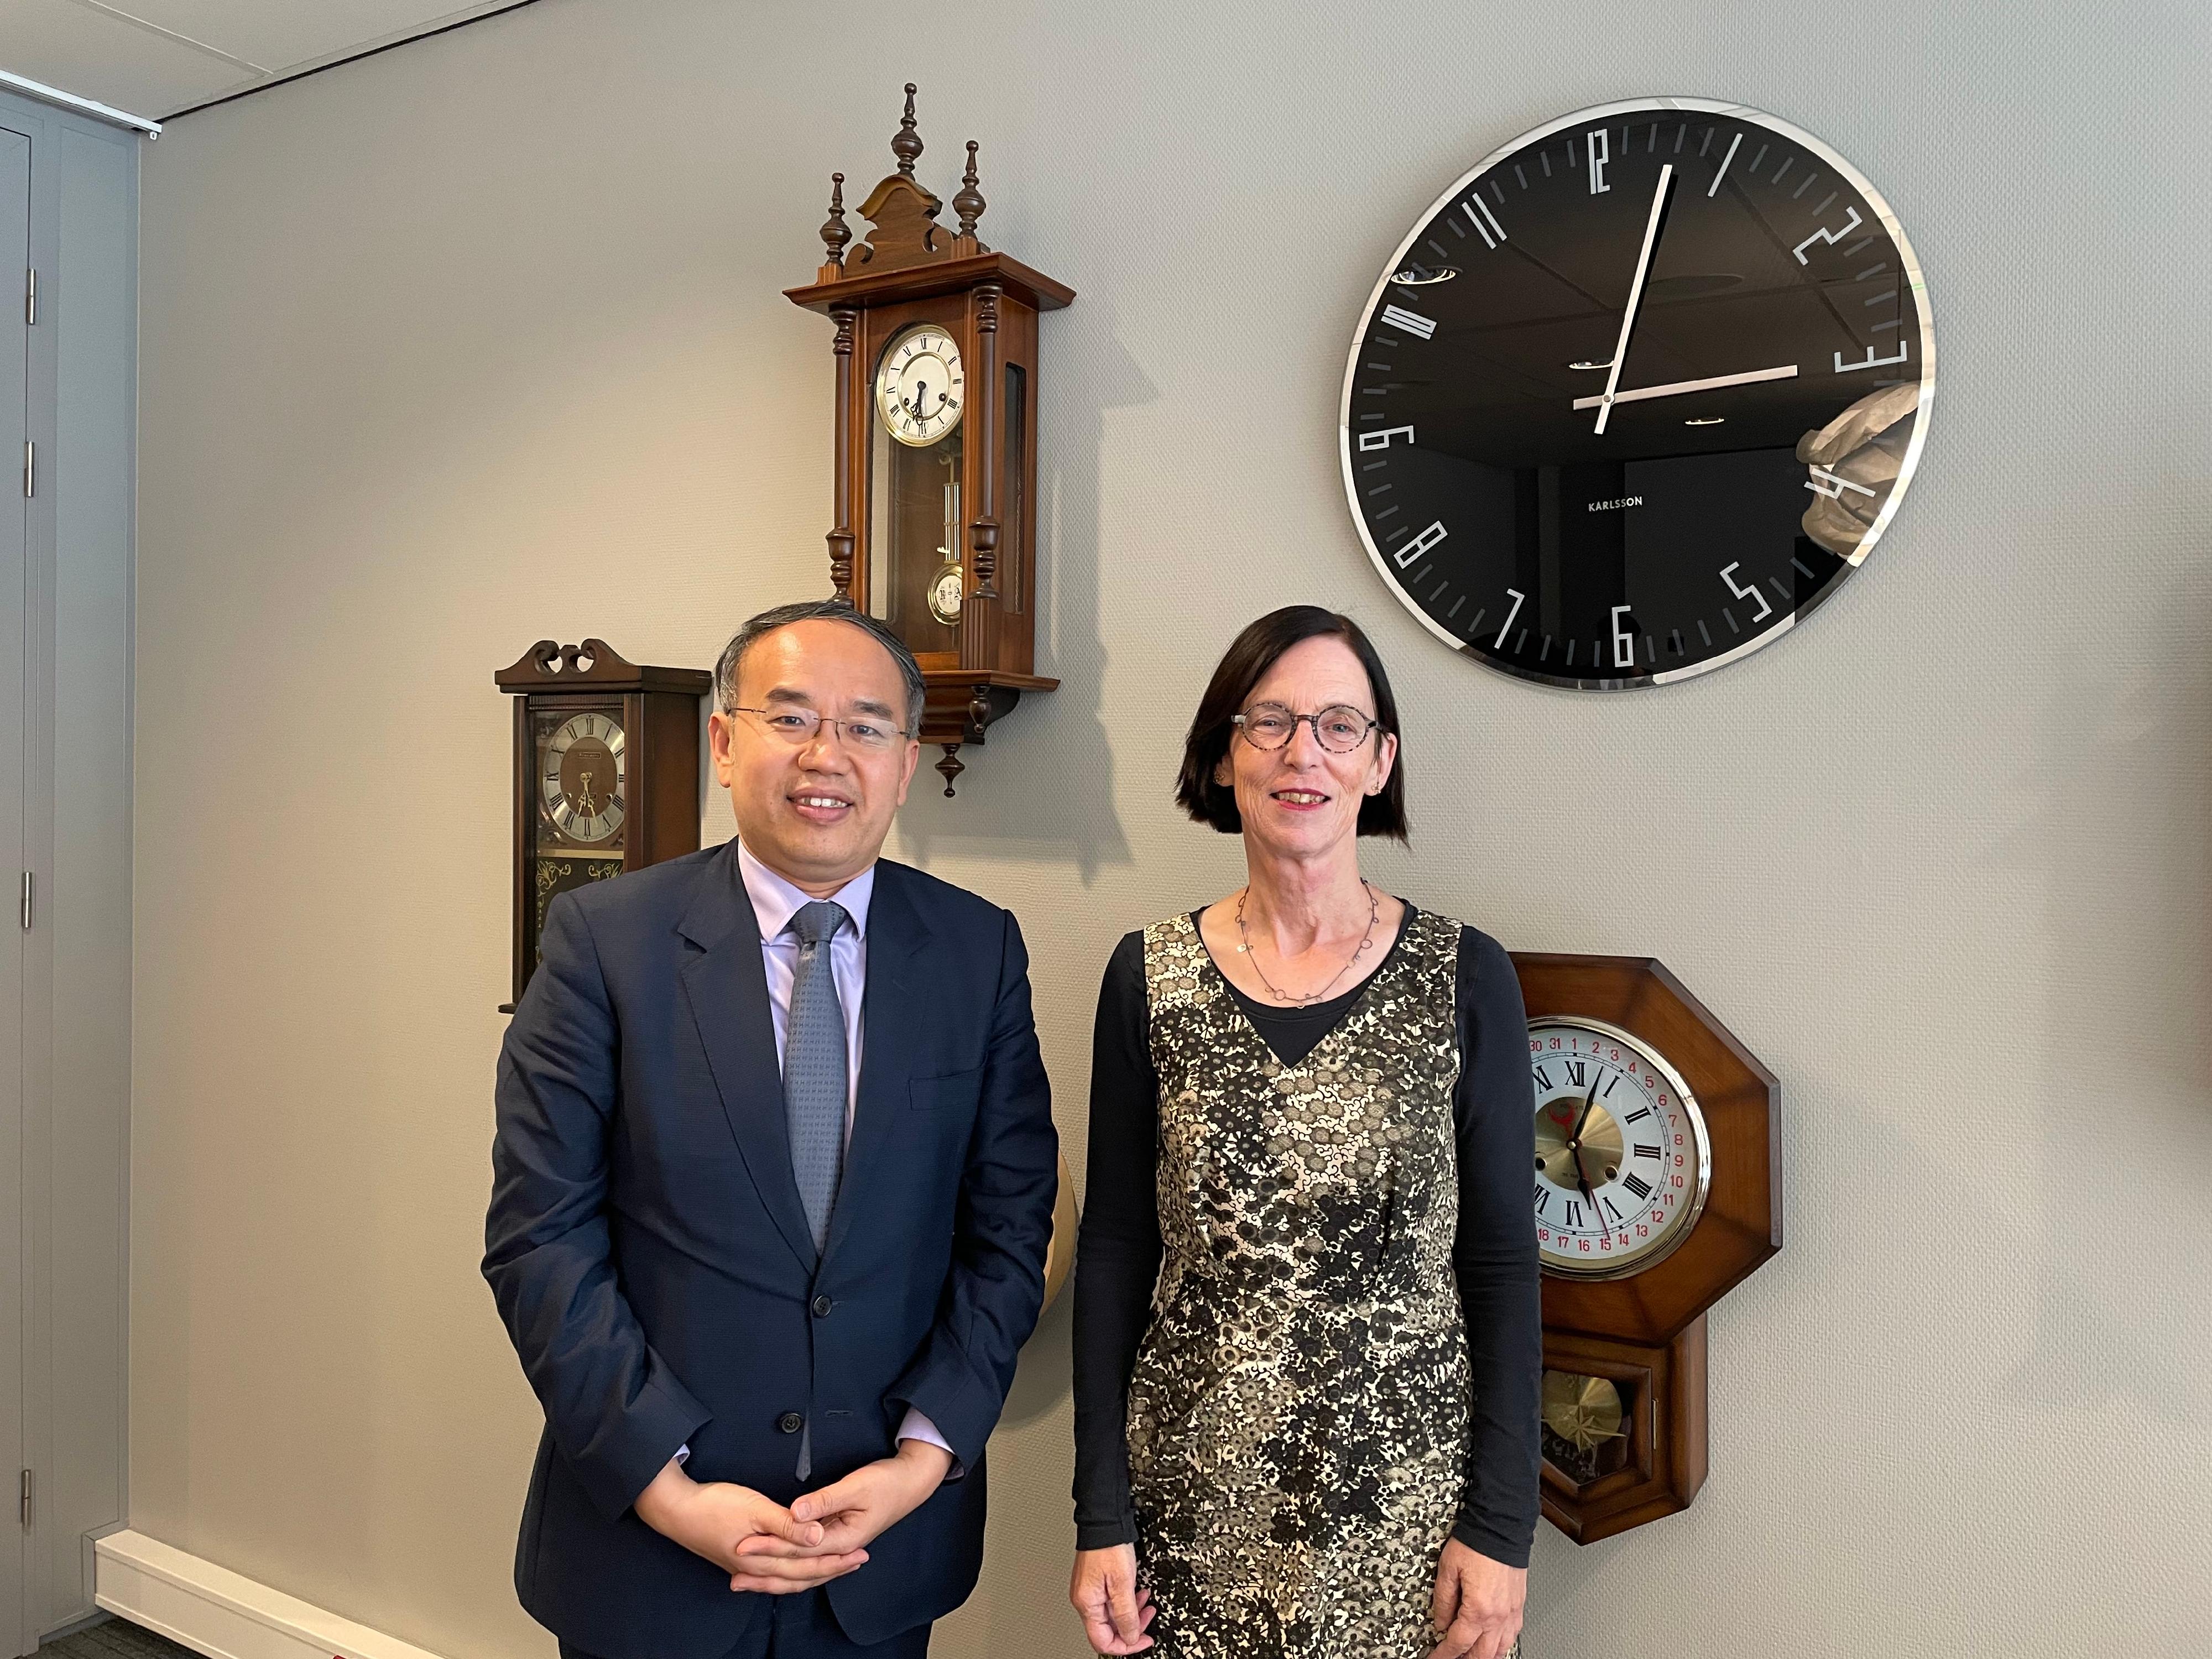 The Secretary for Financial Services and the Treasury, Mr Christopher Hui, is promoting Hong Kong's Web3 ecosystem and meeting senior financial officials in the Netherlands. Photo shows Mr Hui (left) meeting with the Chair, Dutch Authority for the Financial Markets, Ms Laura van Geest (right), in Amsterdam on June 3 (Amsterdam time).